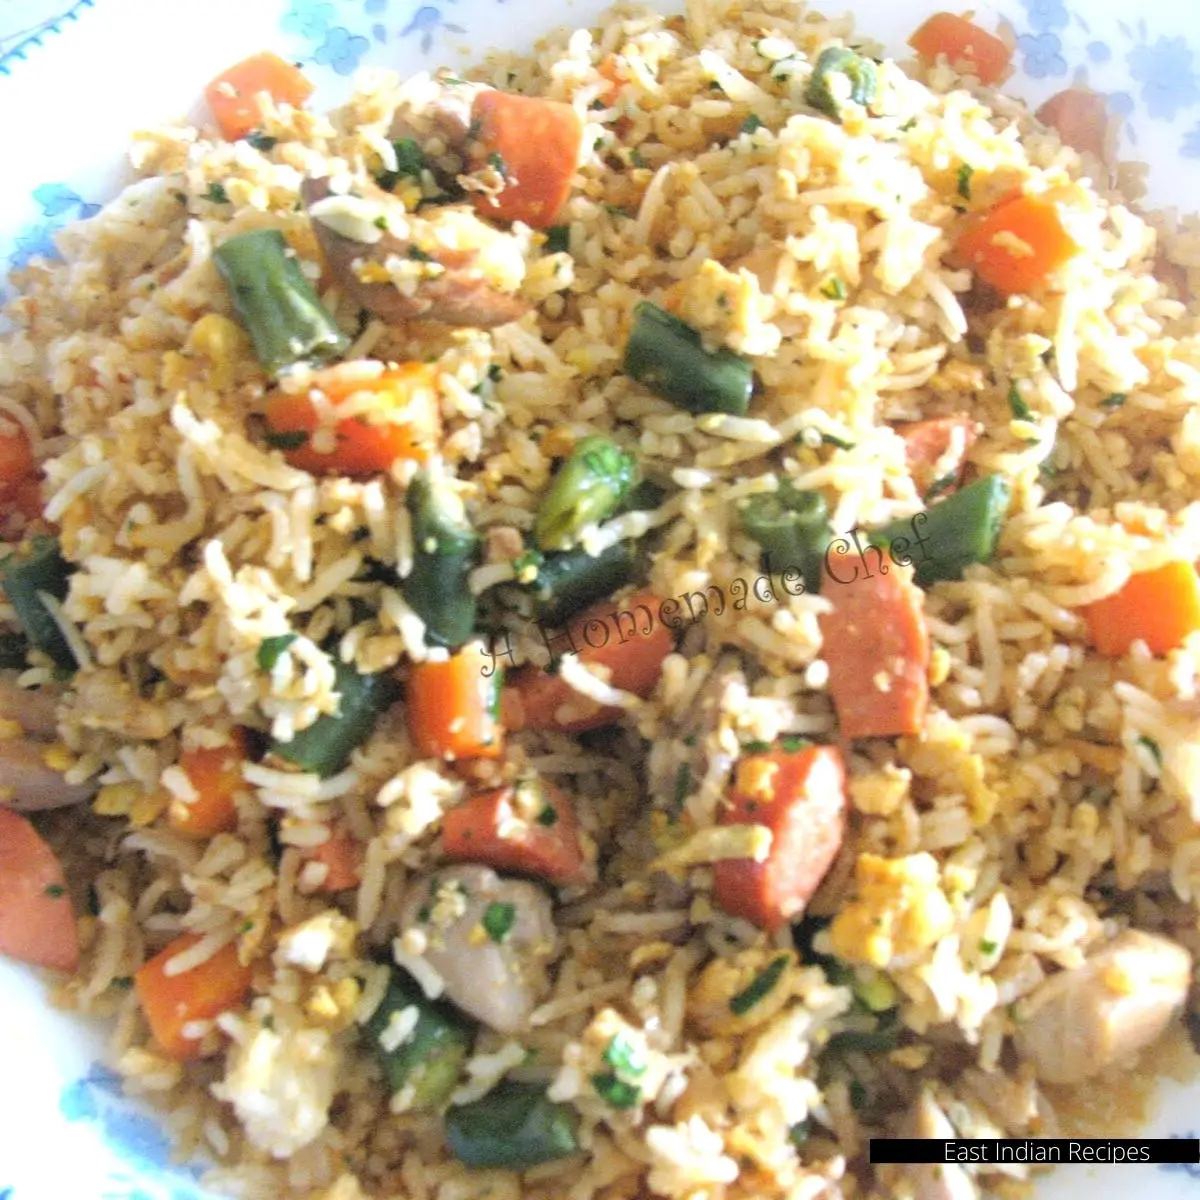 How to make fried rice Indo-Chinese